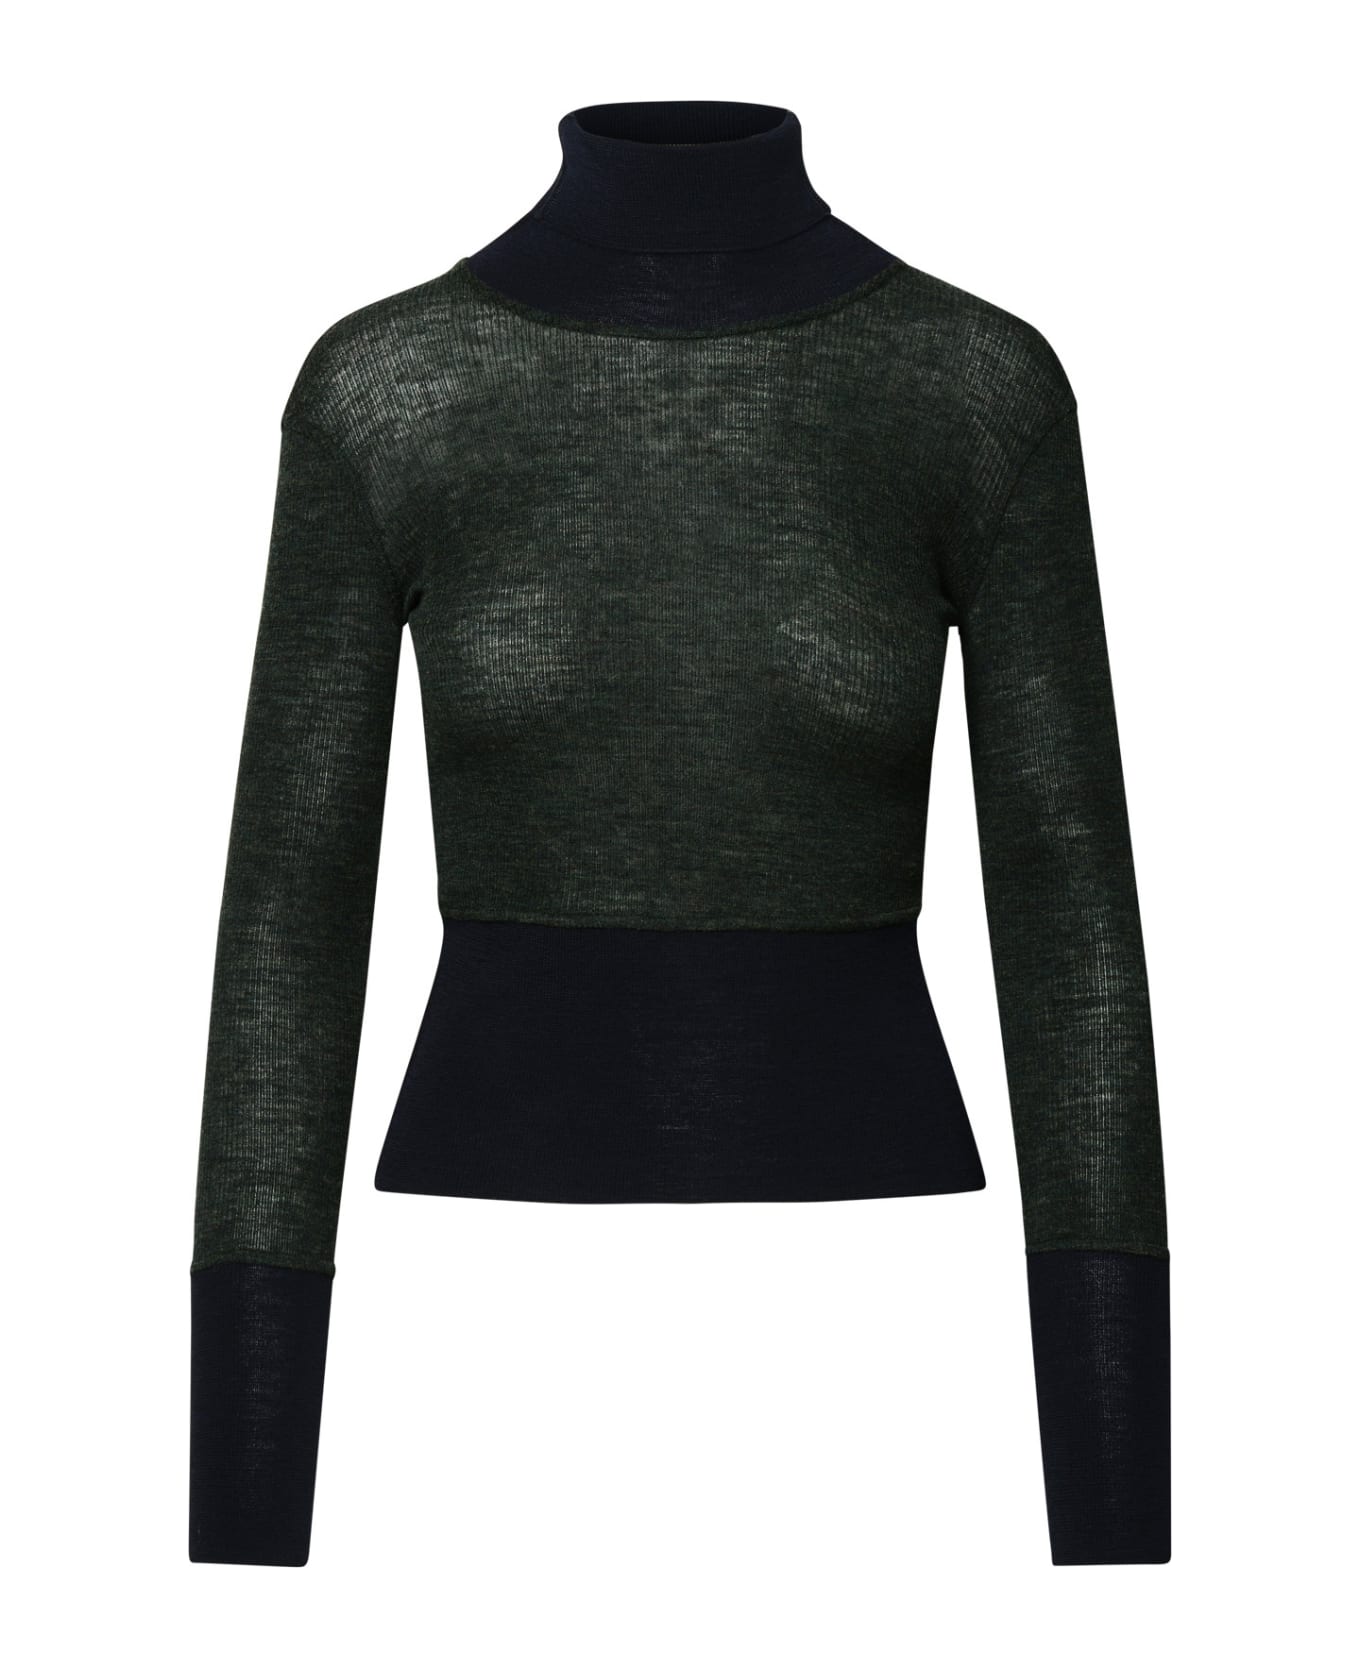 Thom Browne Green And Black Wool Turtleneck Sweater - Green ニットウェア